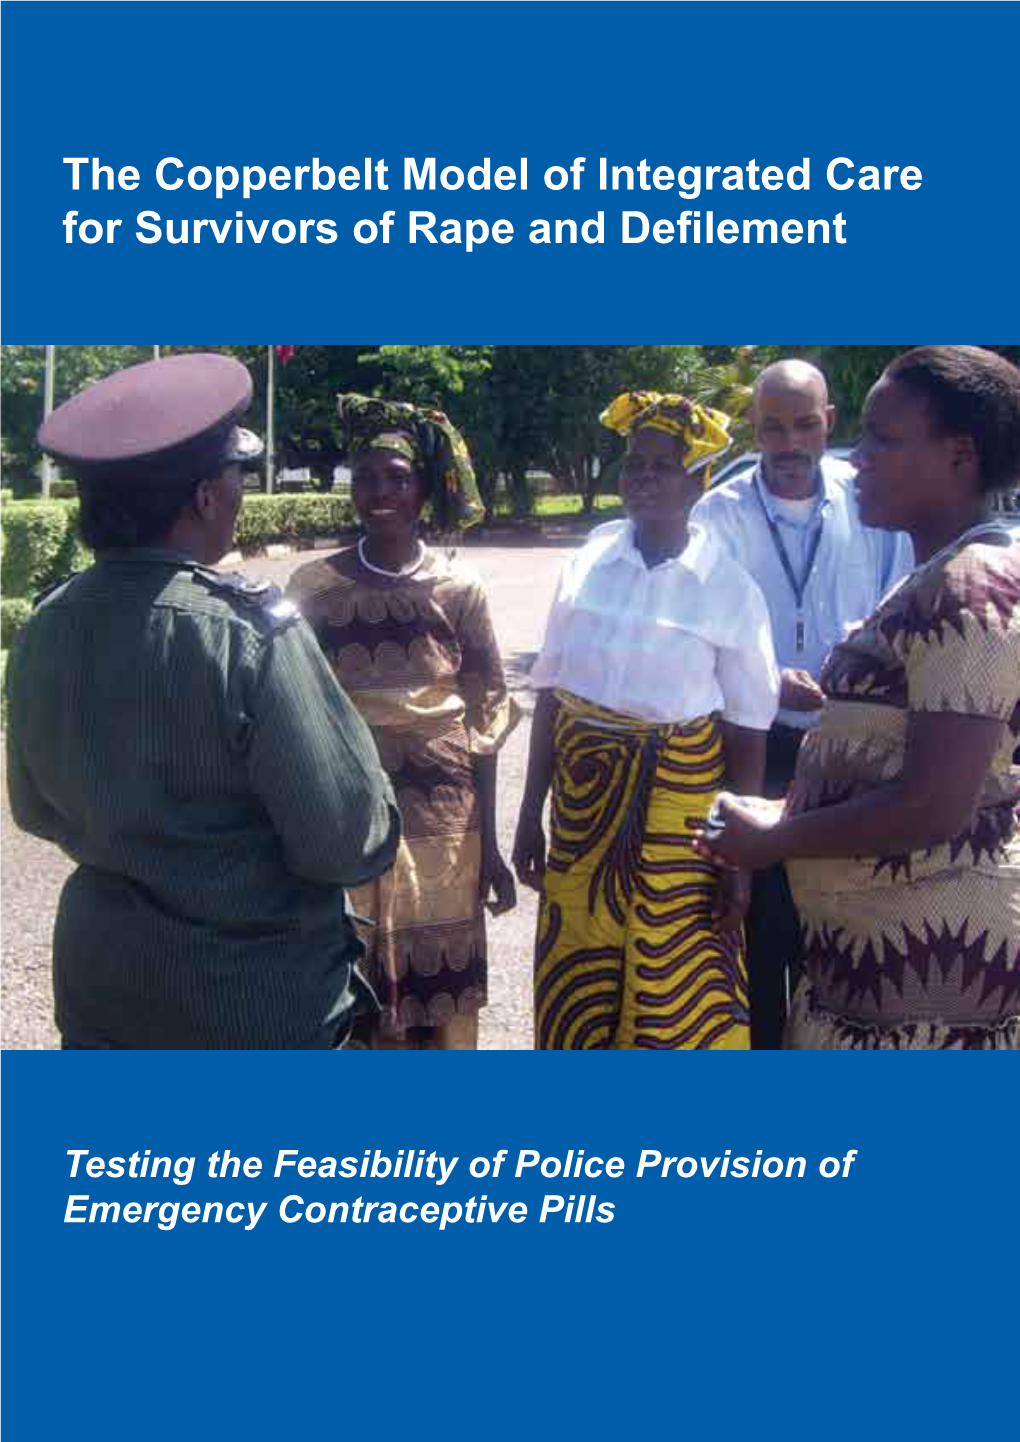 The Copperbelt Model of Integrated Care for Survivors of Rape and Defilement